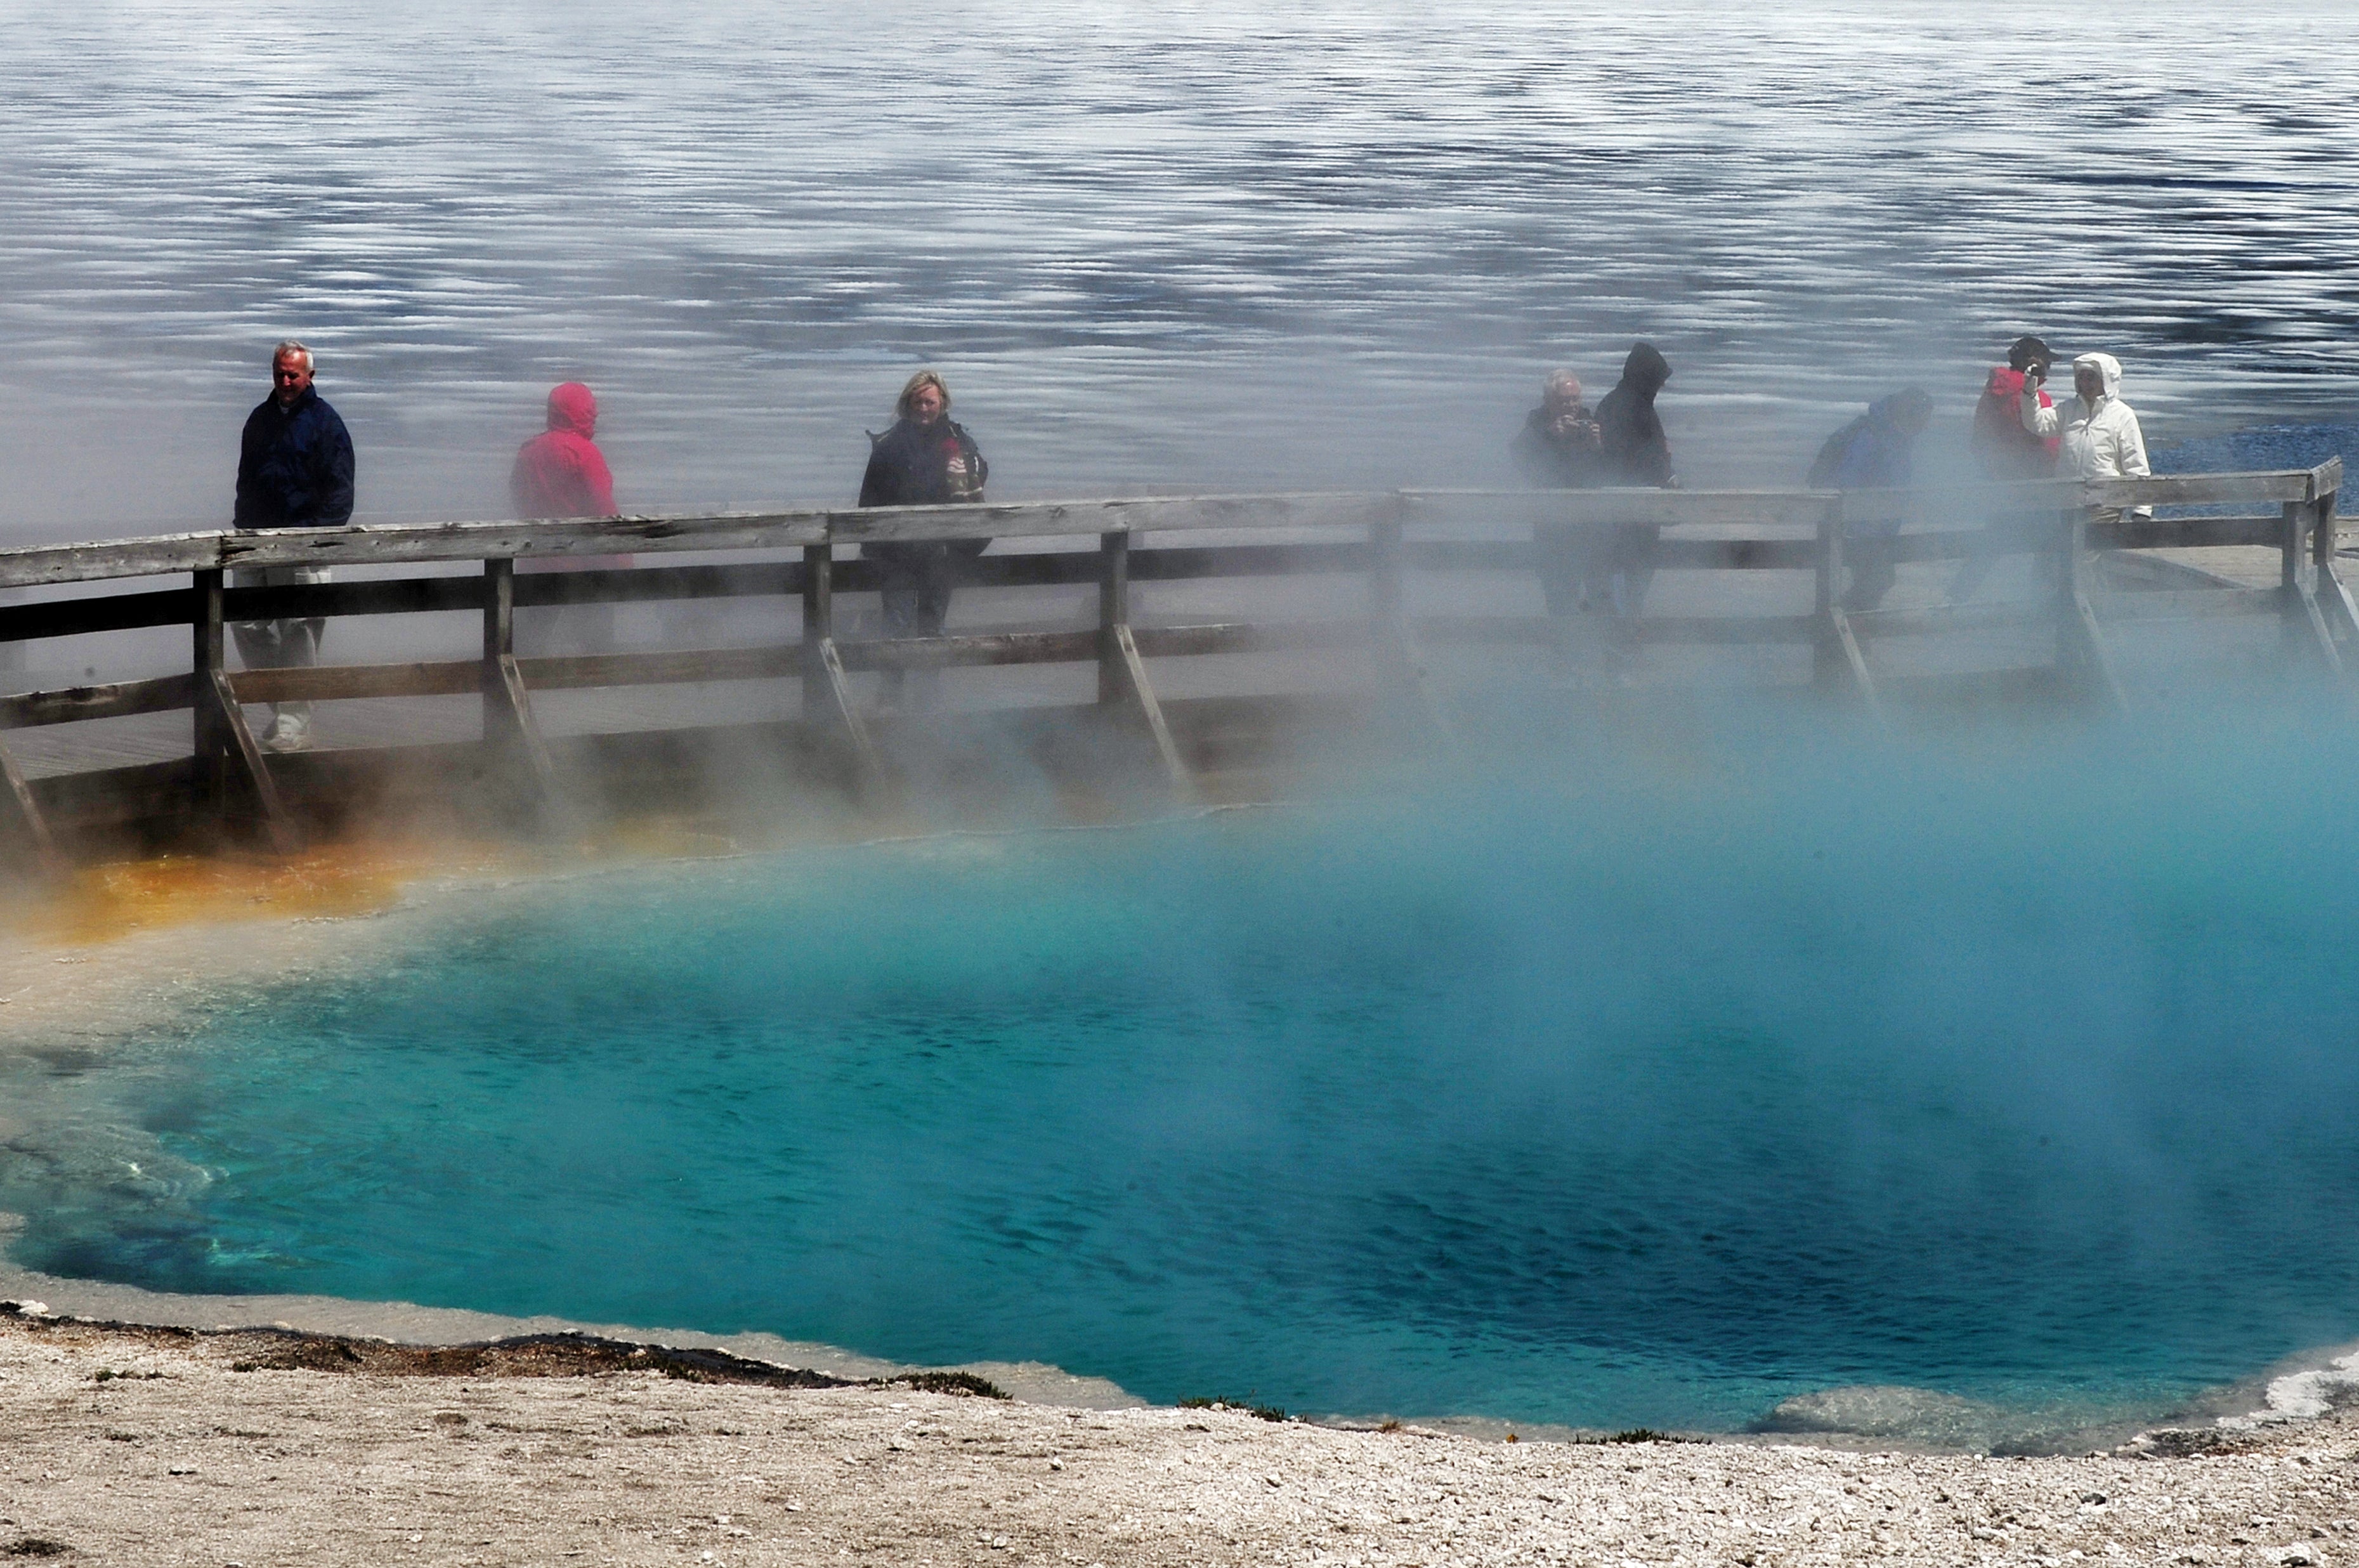 Man banned from Yellowstone after trying to cook chickens in geyser